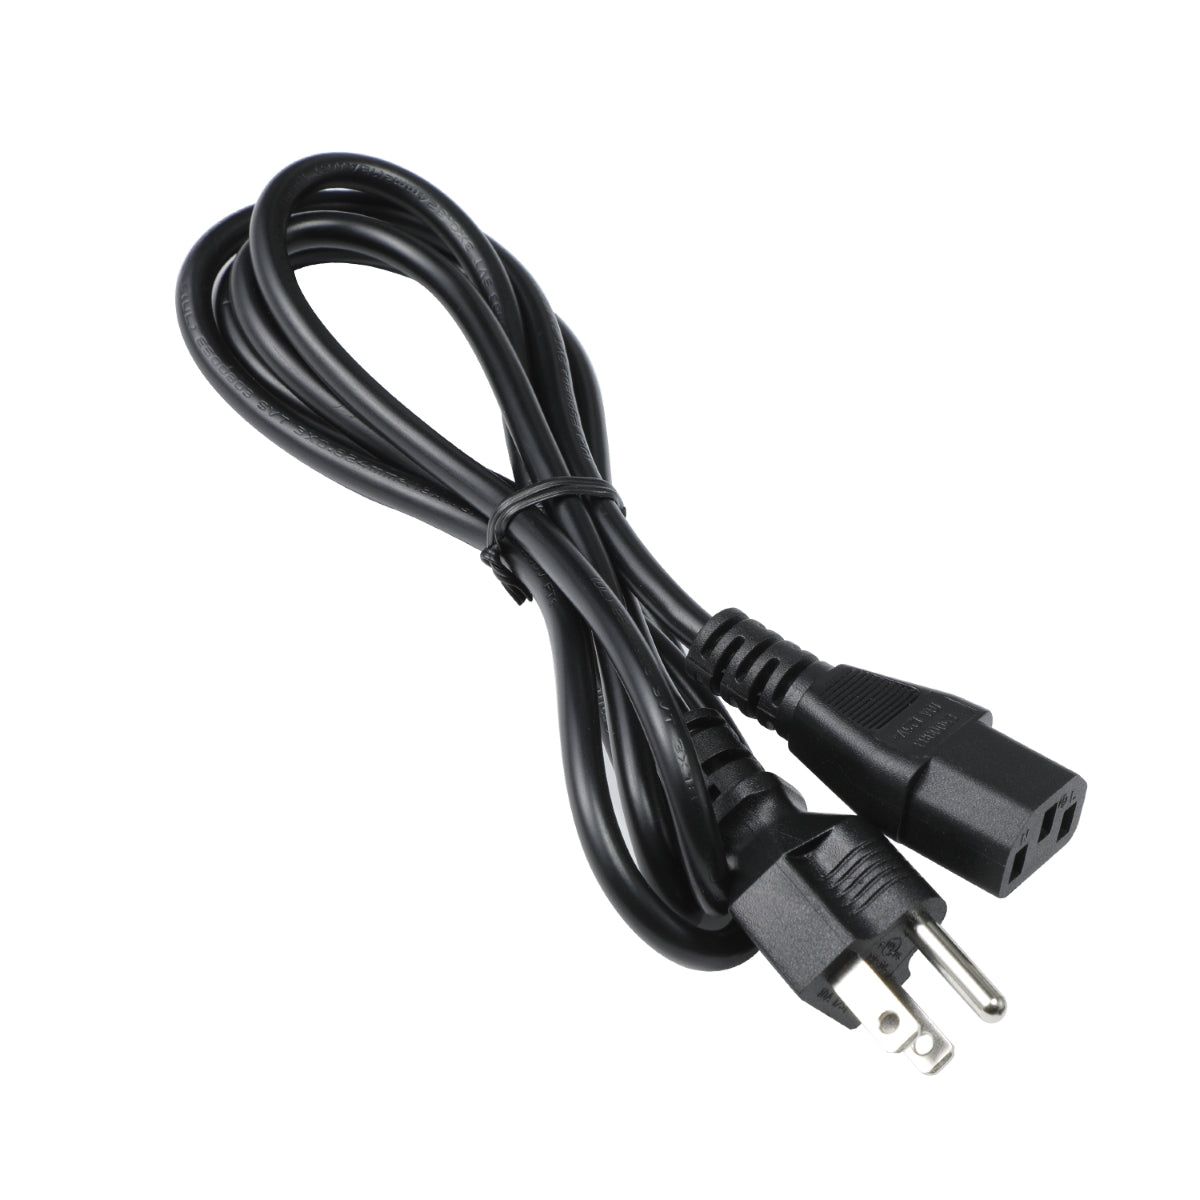 Power Cord for LG 24UD58-B Monitor.